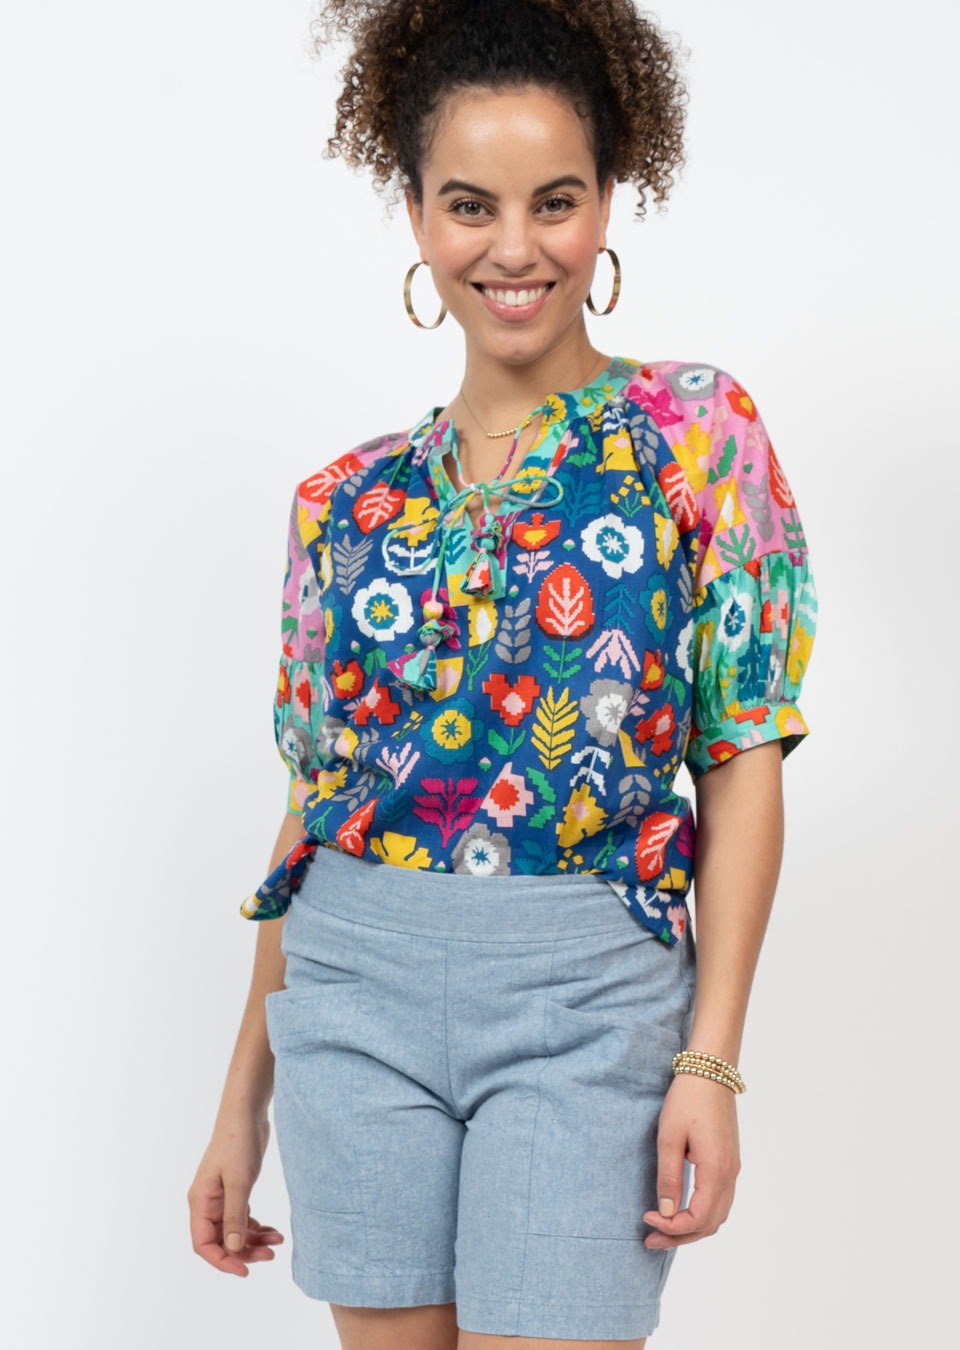 ivy jane folklore patch top in multi-front